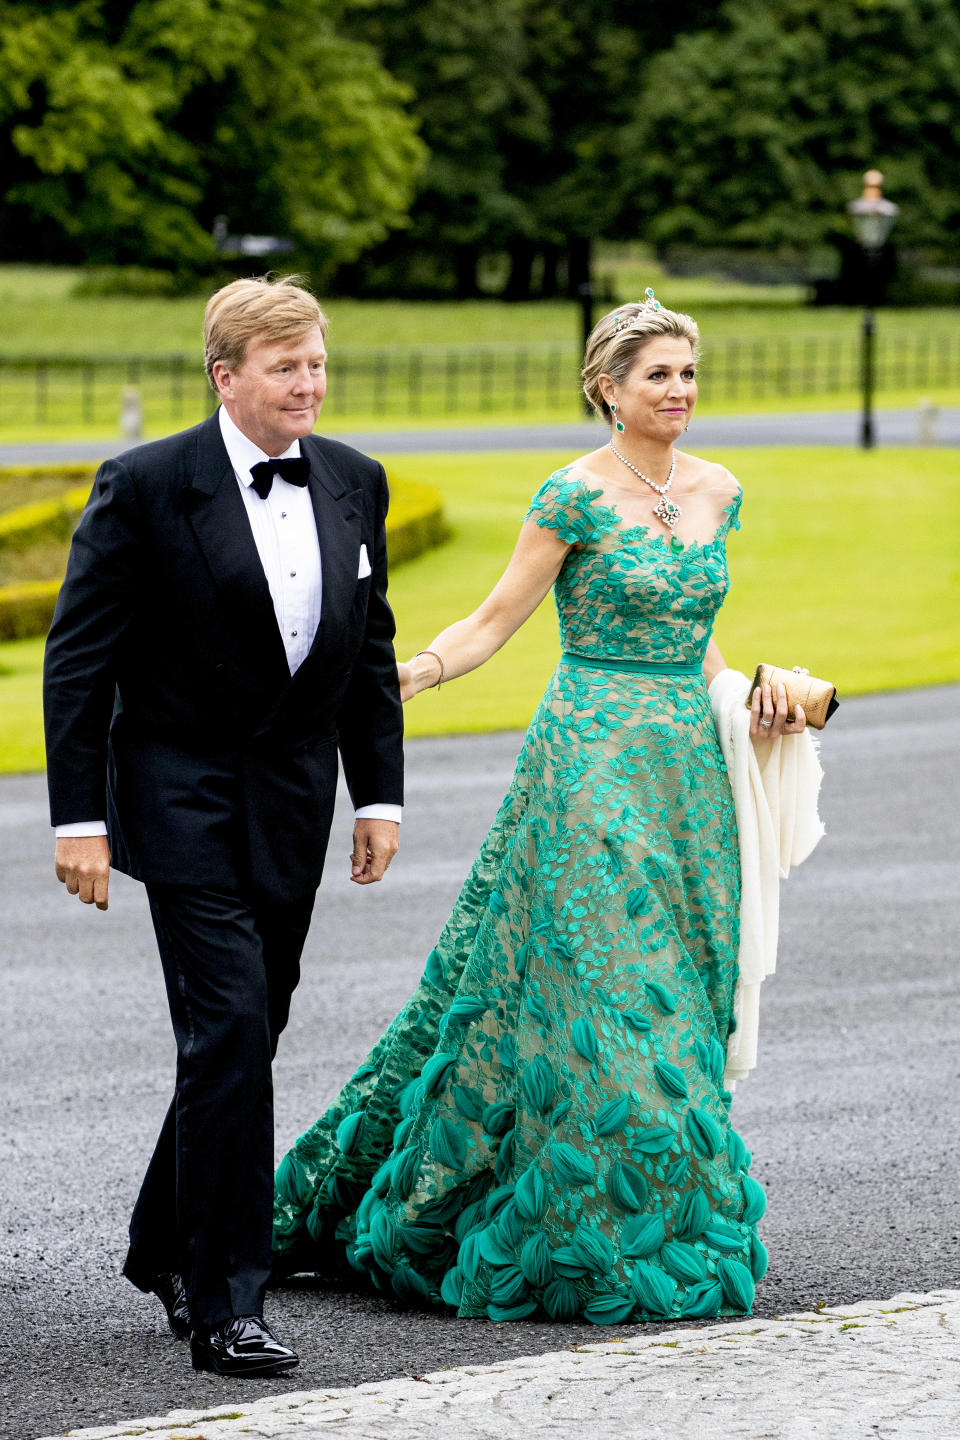 DUBLIN, IRELAND - JUNE 12: King Willem-Alexander of The Netherlands and Queen Maxima of The Netherlands during an official state banquet offered by President Michael Higgins of Ireland and his wife Sabrina Higgins at the Presidential Palace during day one of a three-day State visit to Ireland by the Dutch royals on June 12, 2019 in Dublin, Ireland. (Photo by Patrick van Katwijk/Getty Images)